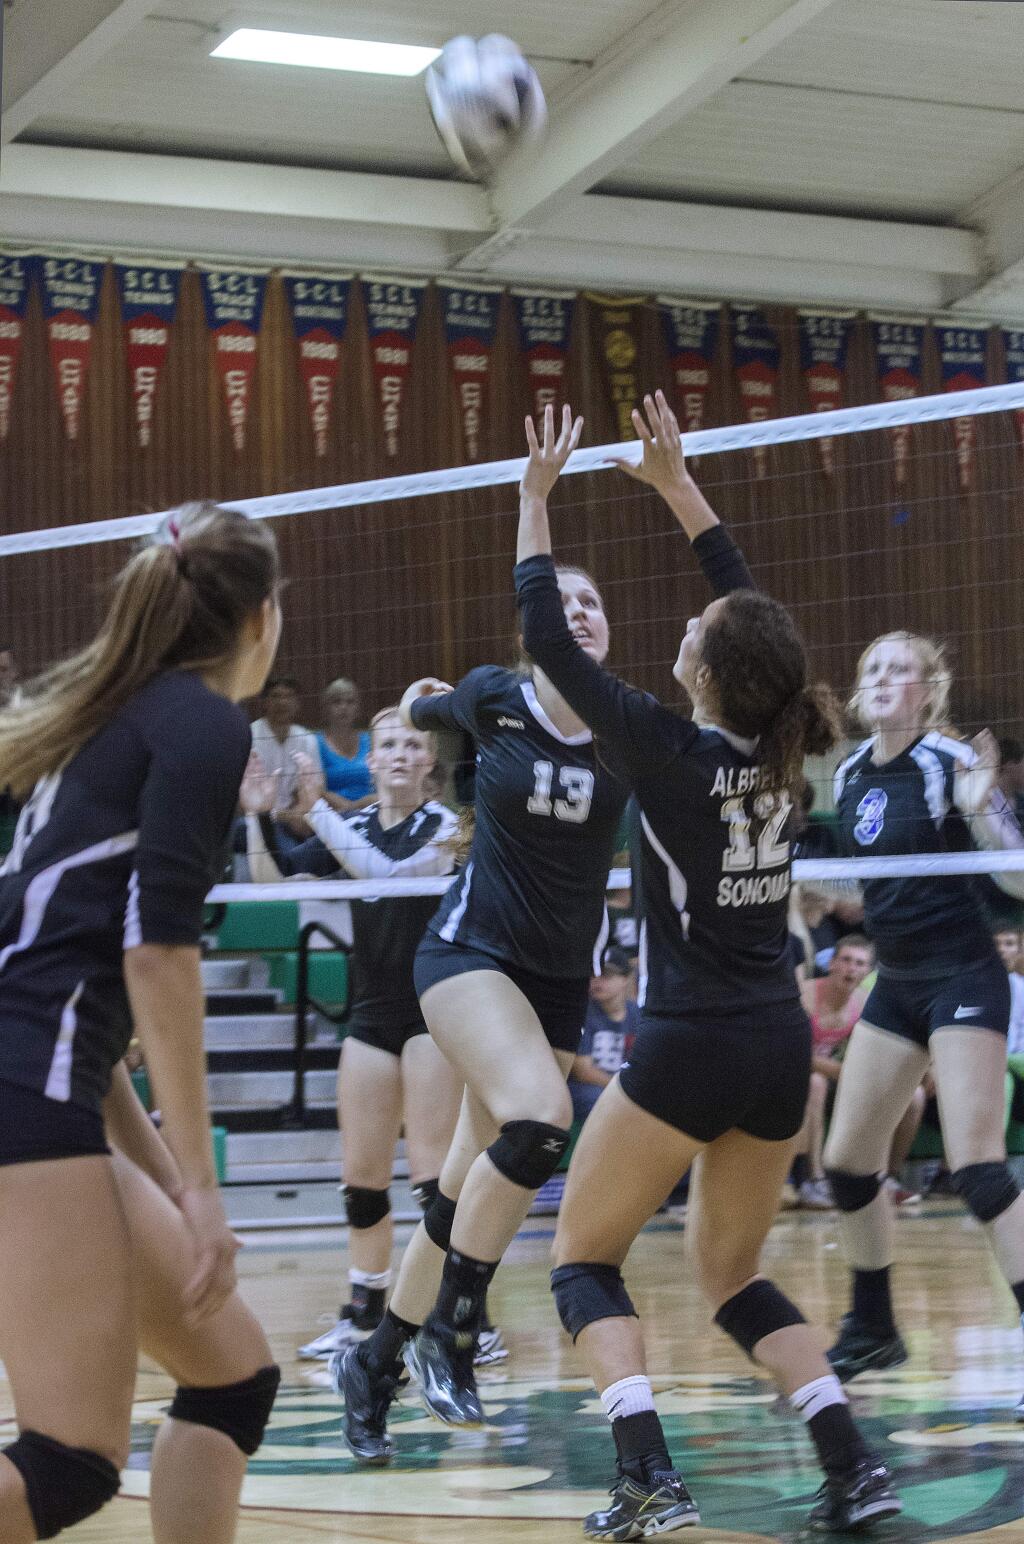 Robbi Pengelly/Index-TribuneReigning SCL player of the year Mackenzie Albrecht (No. 12) sets up teammate Ciara Smith (No. 13) for a kill during the three-time defending SCL champion Lady Dragons' league-opening victory over longtime rival Petaluma Tuesday night in Pfeiffer Gym.